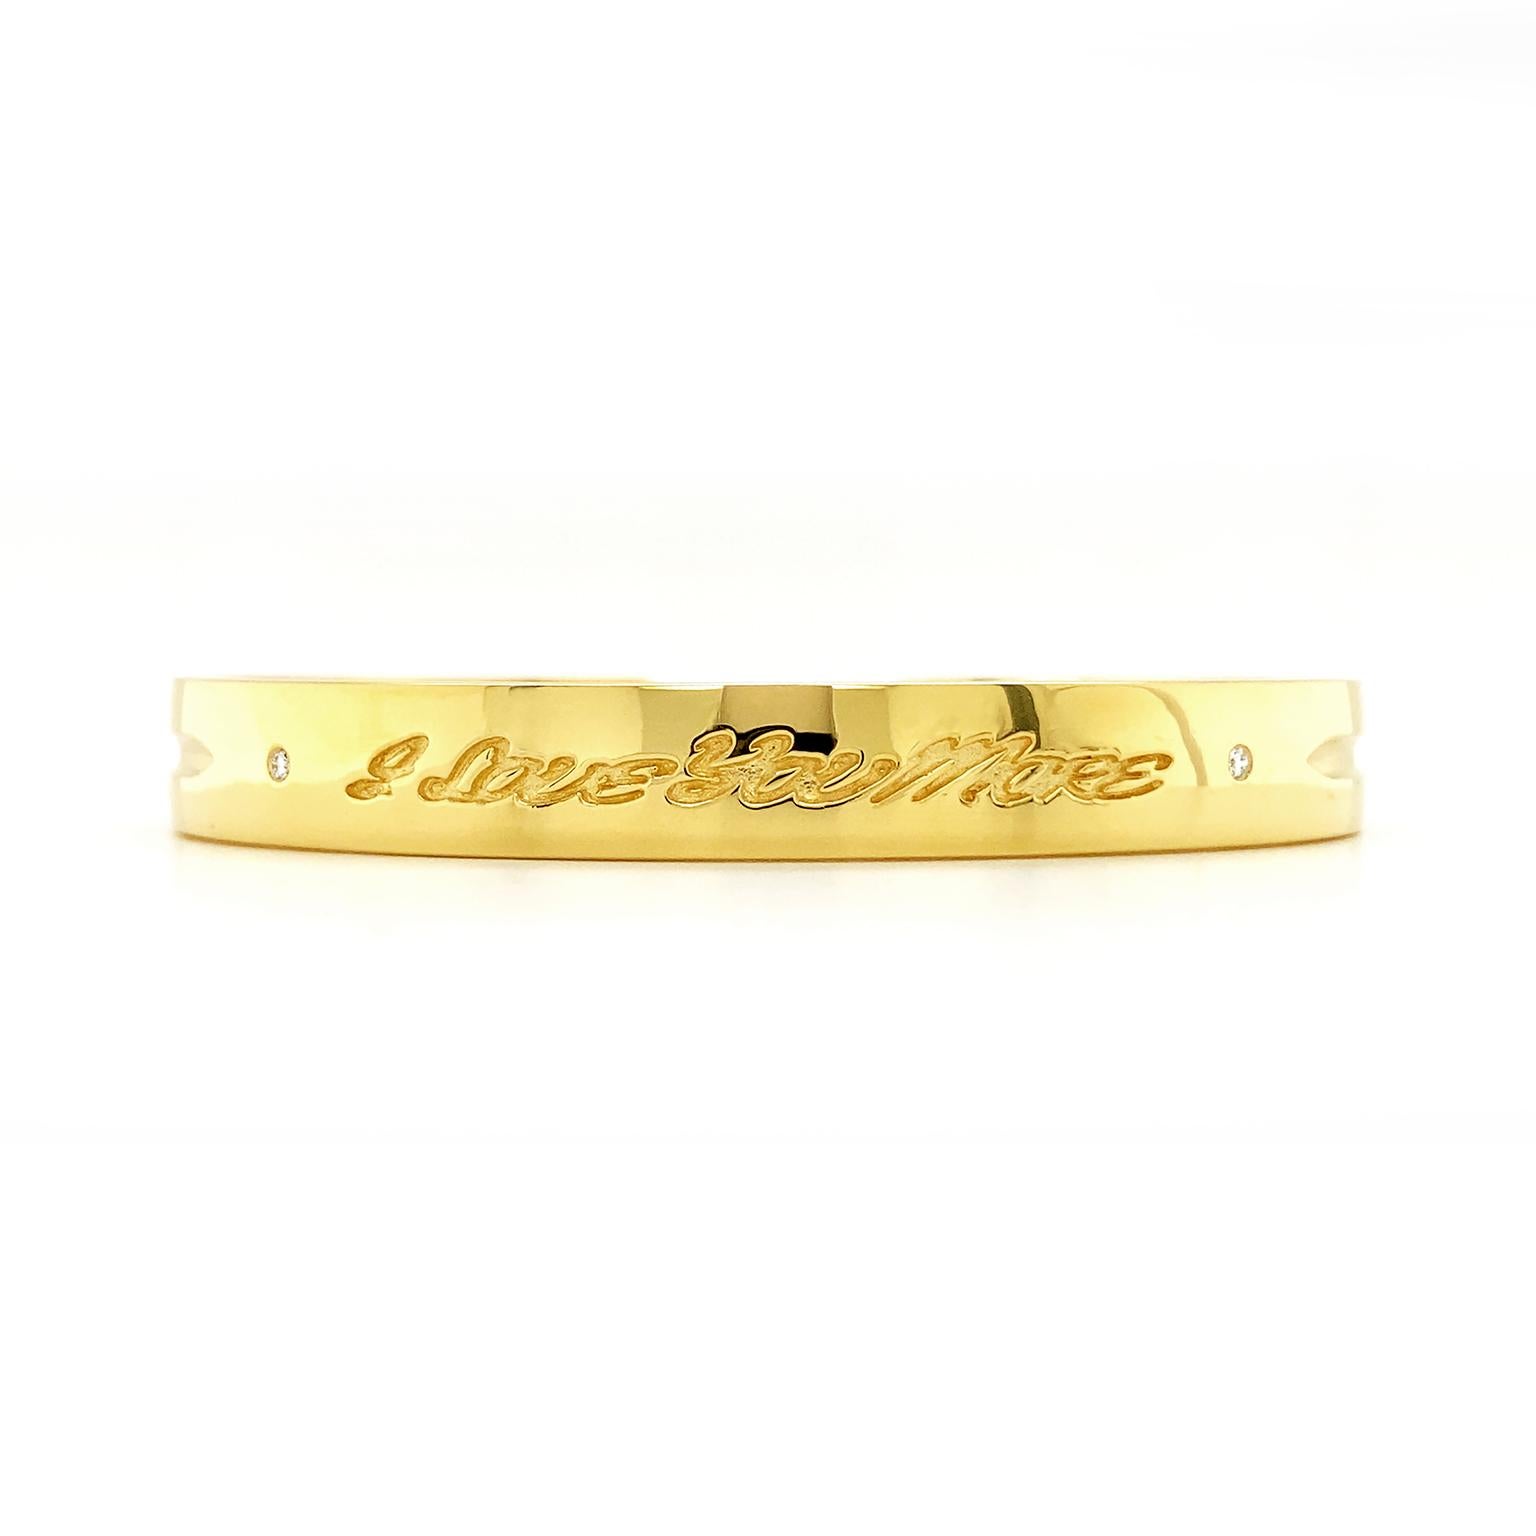 This bracelet is engraved with love. The 18k yellow gold bangle is polished smooth, with grooves and hinges for the wearer’s convenience. The words 'I love you more' are written in cursive upon the surface. Round brilliant cut diamonds flank the